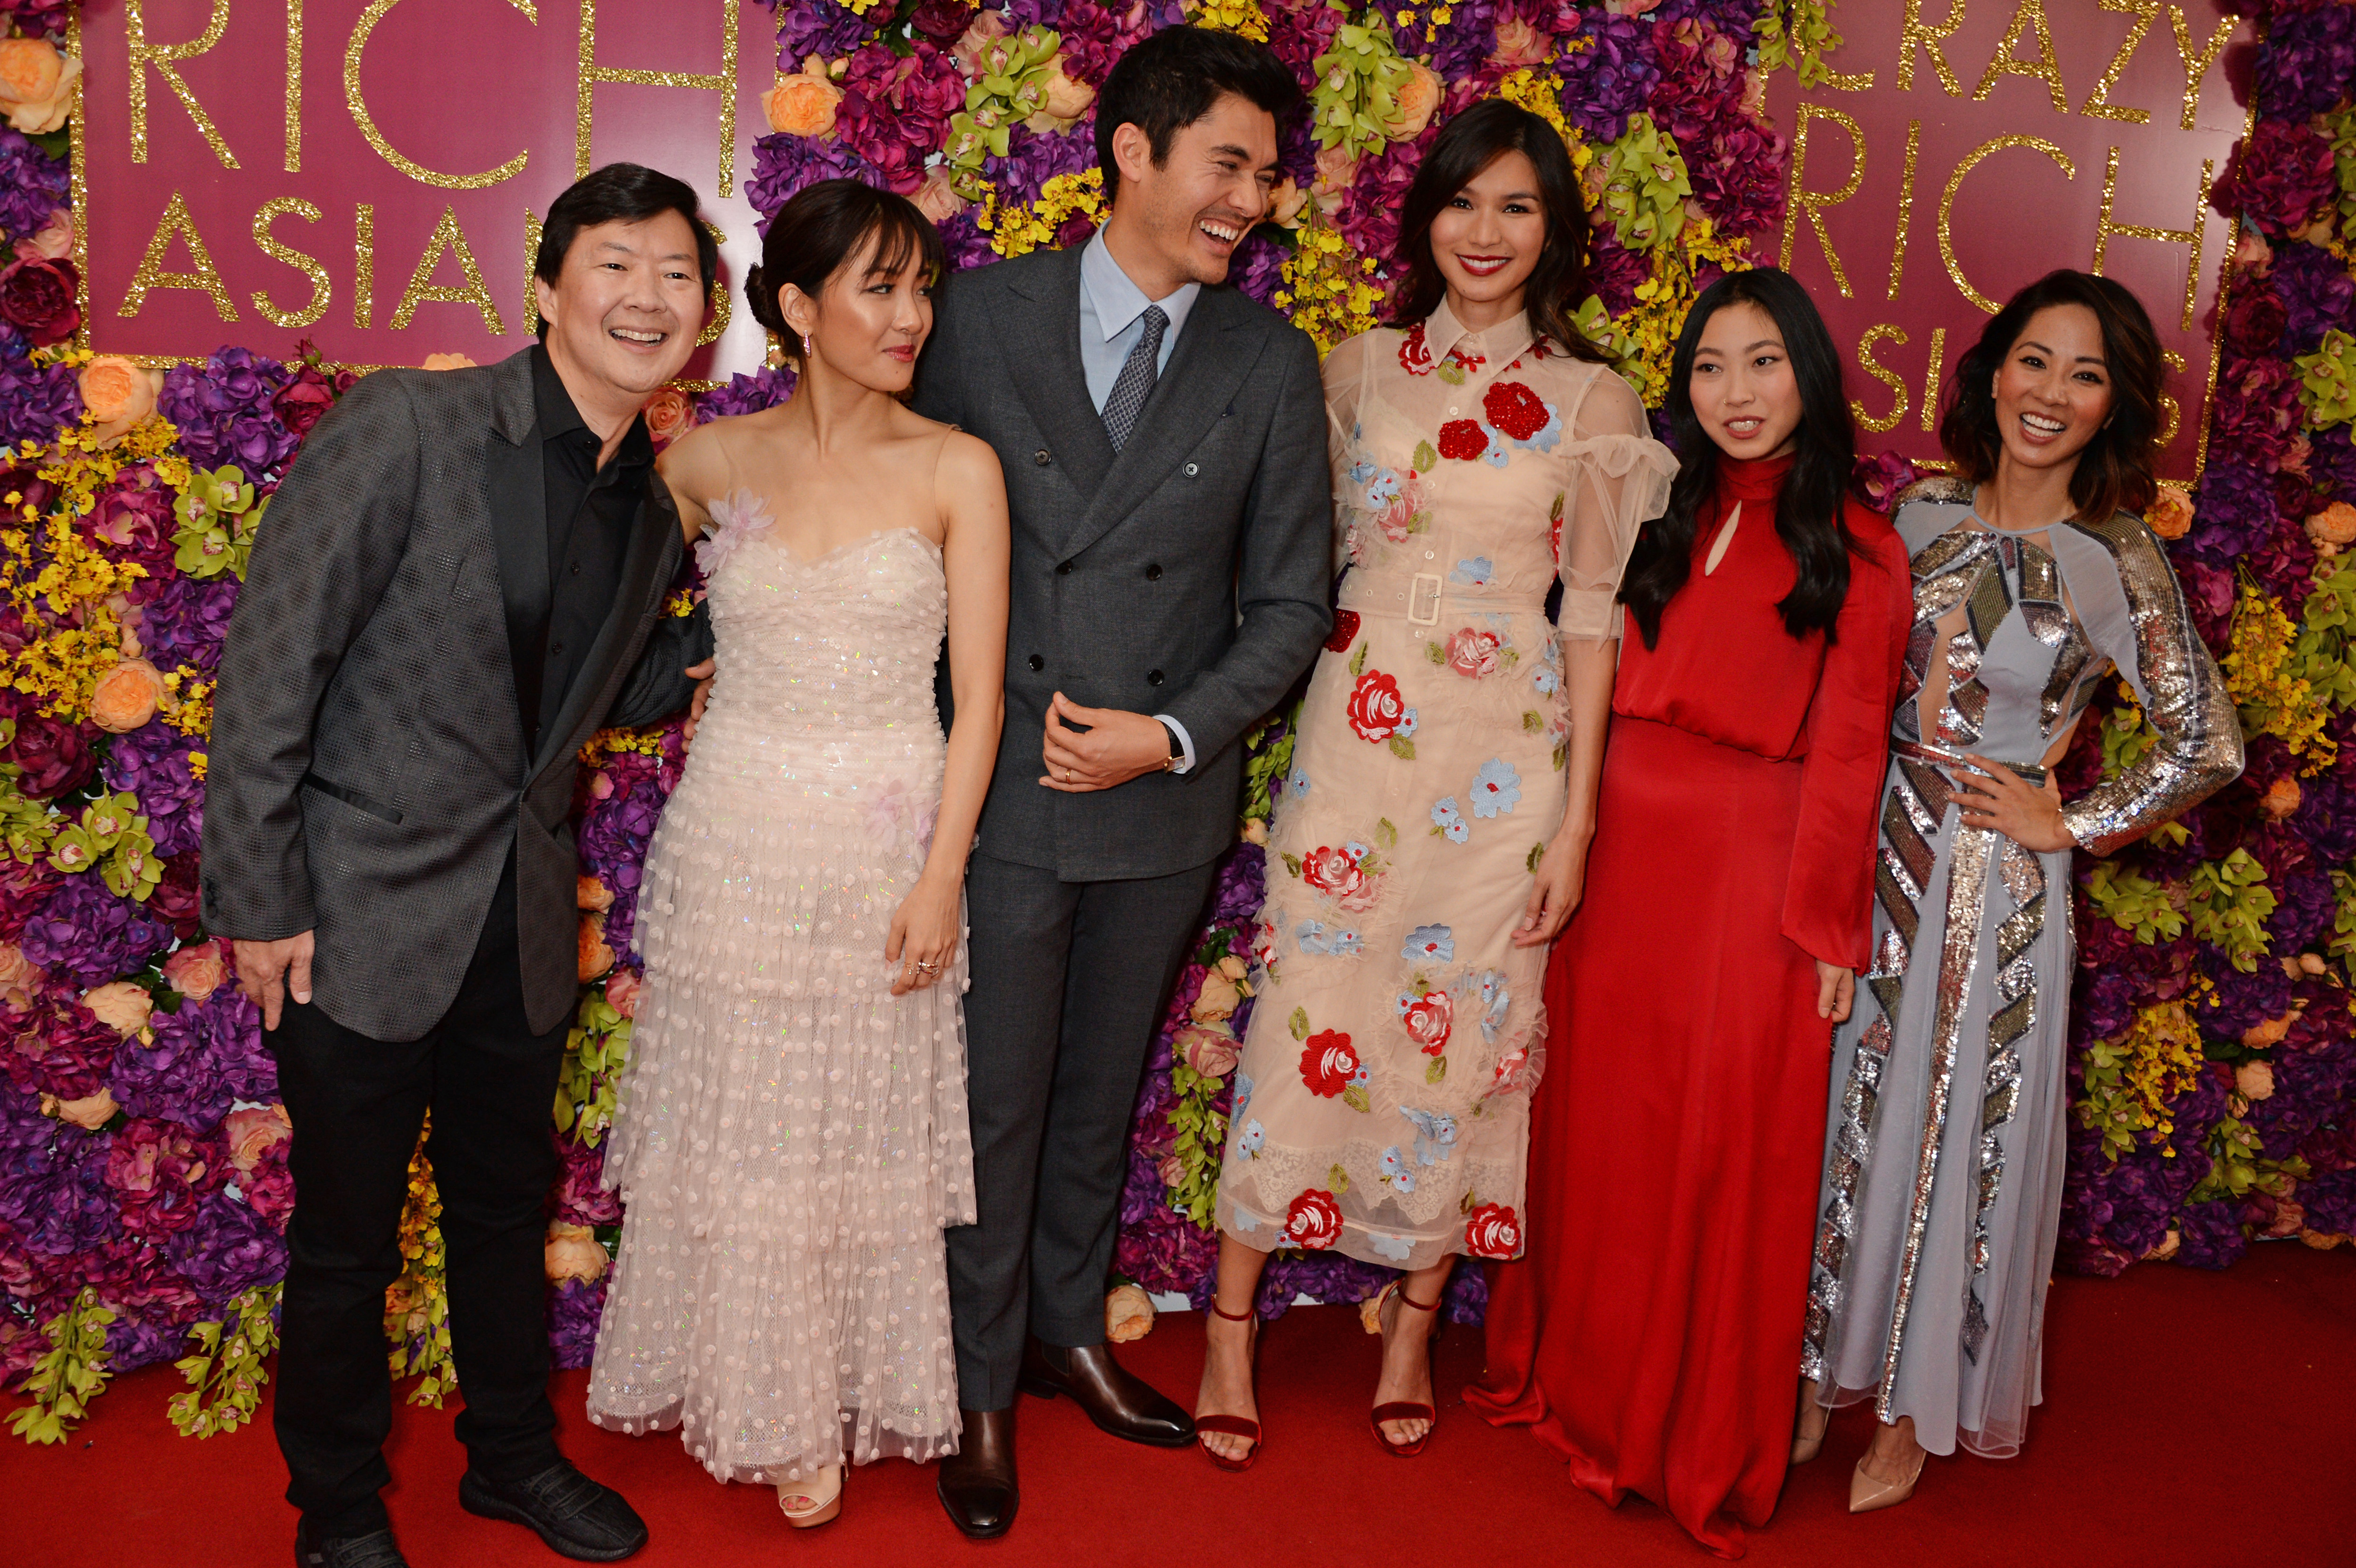 Ken Jeong, Constance Wu, Henry Golding, Gemma Chan, Awkwafina, and Jing Lusi at a special screening of "Crazy Rich Asians" on September 4, 2018, in London, England. | Source: Getty Images